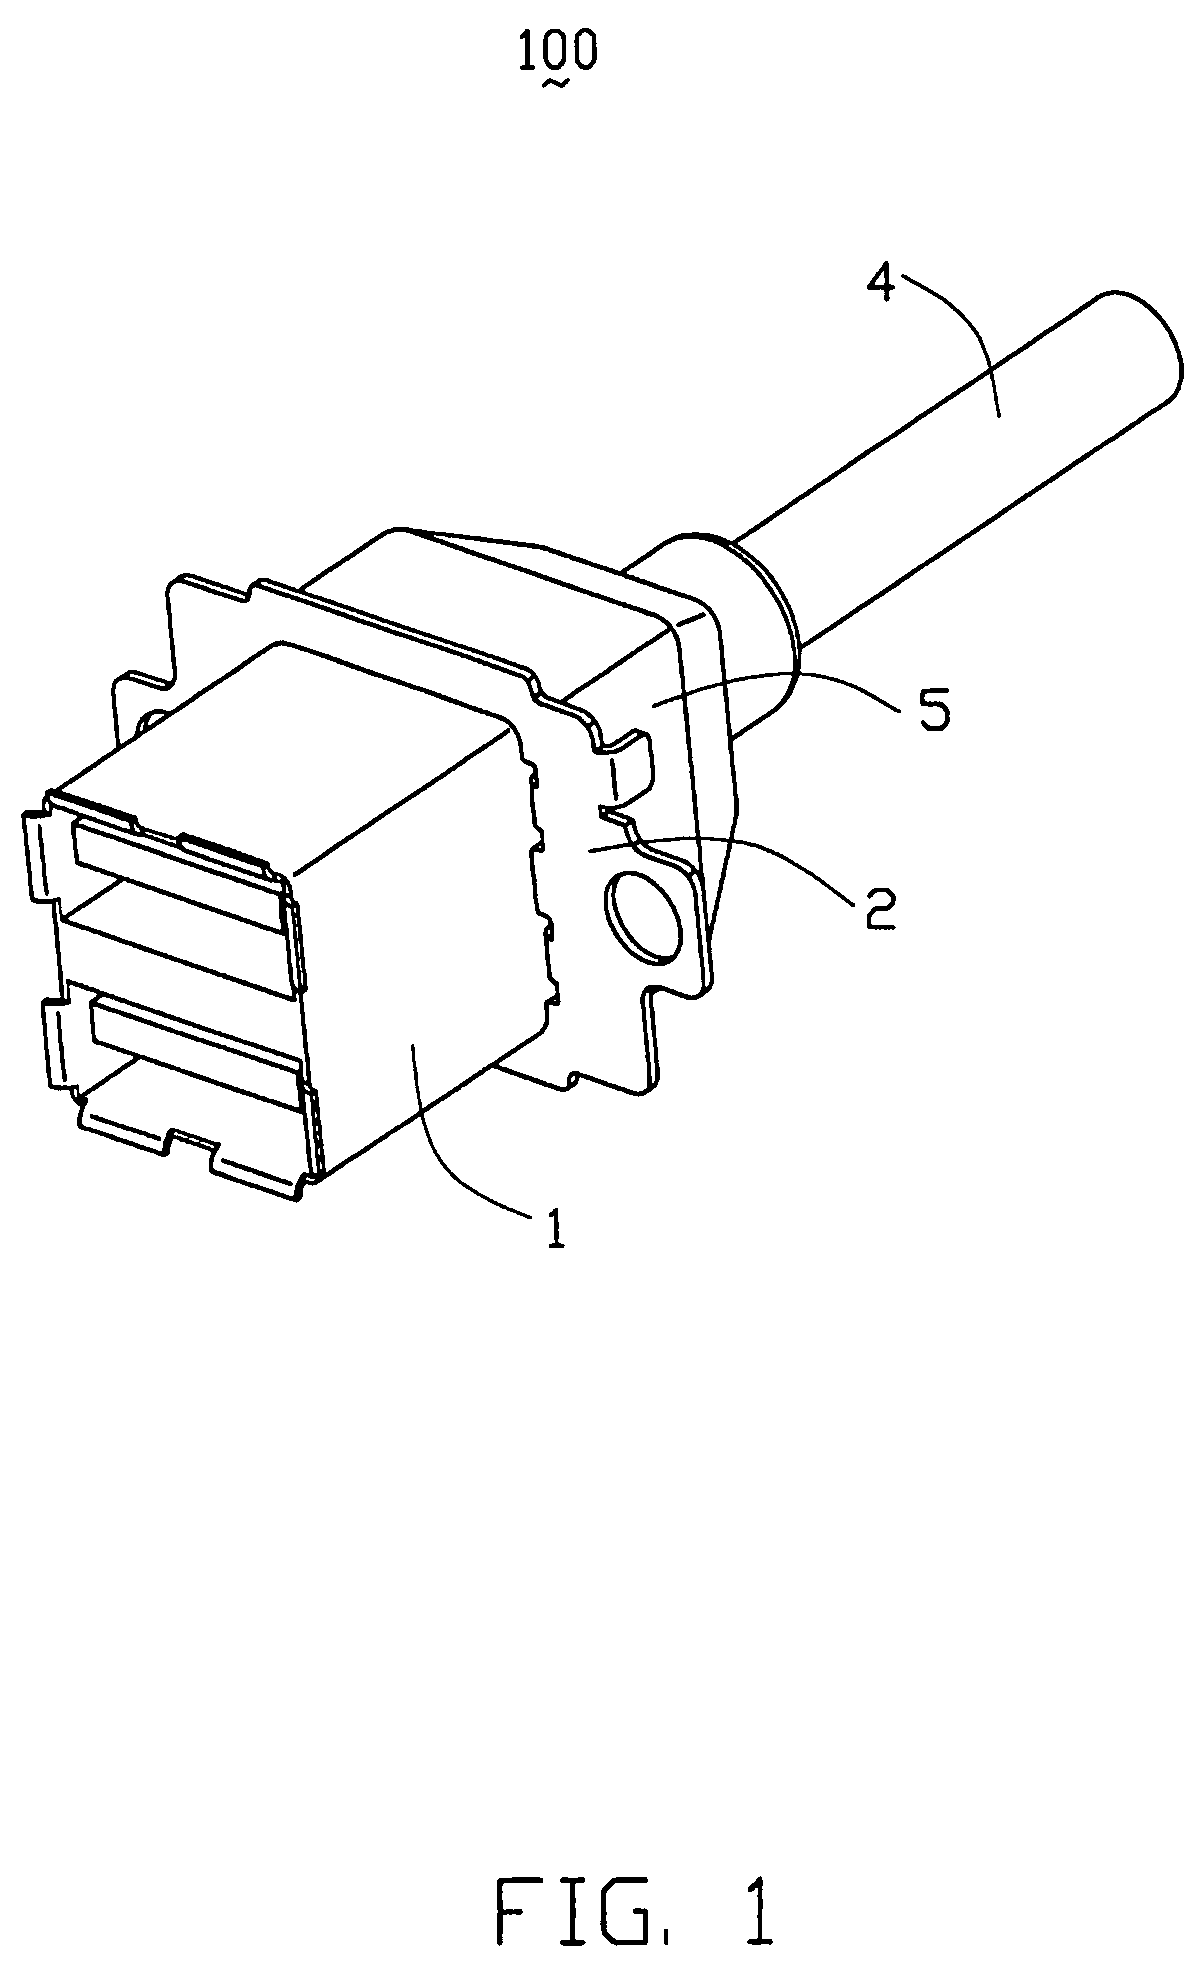 Cable connector assembly with internal printed circuit board